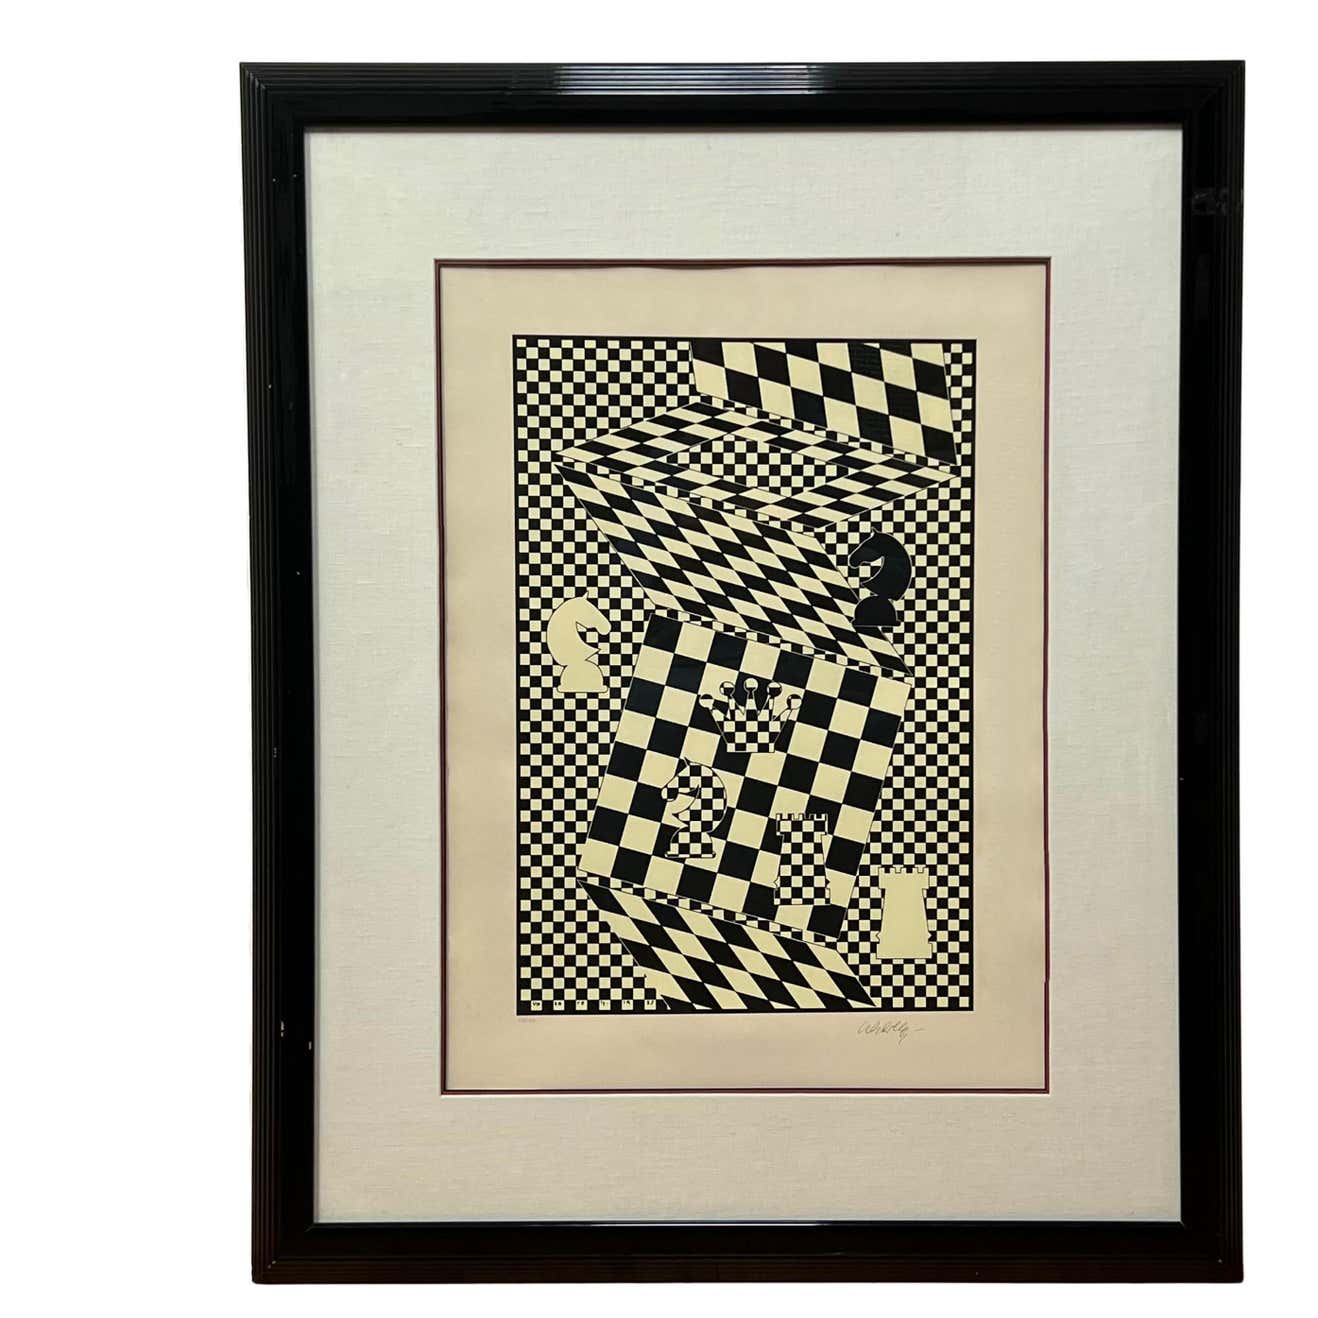 Black and White Lithograph "L'echiquier" (the Chessboard) by Victor Vasarely